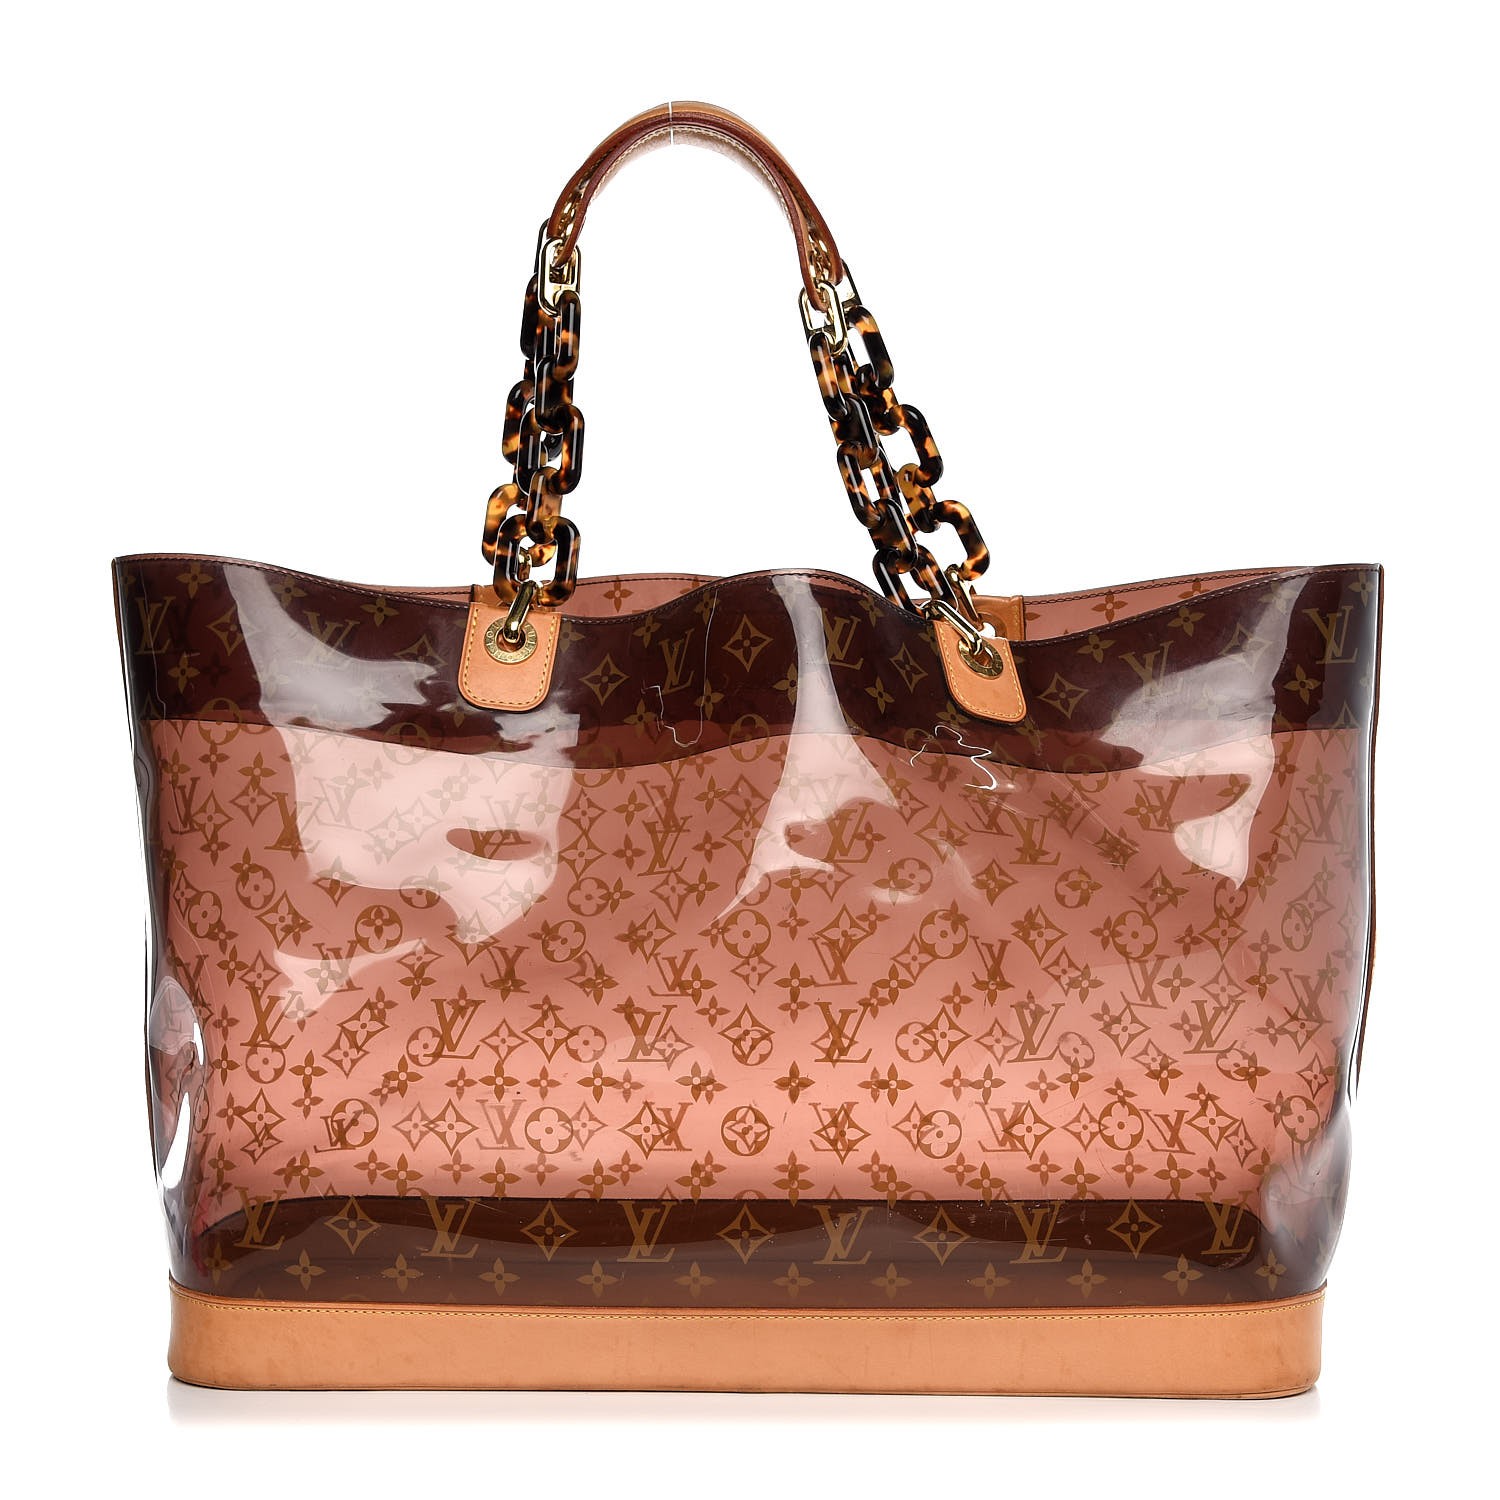 Louis Vuitton Clear Cabas Sac Ambre PM Translucent Tote Bag with